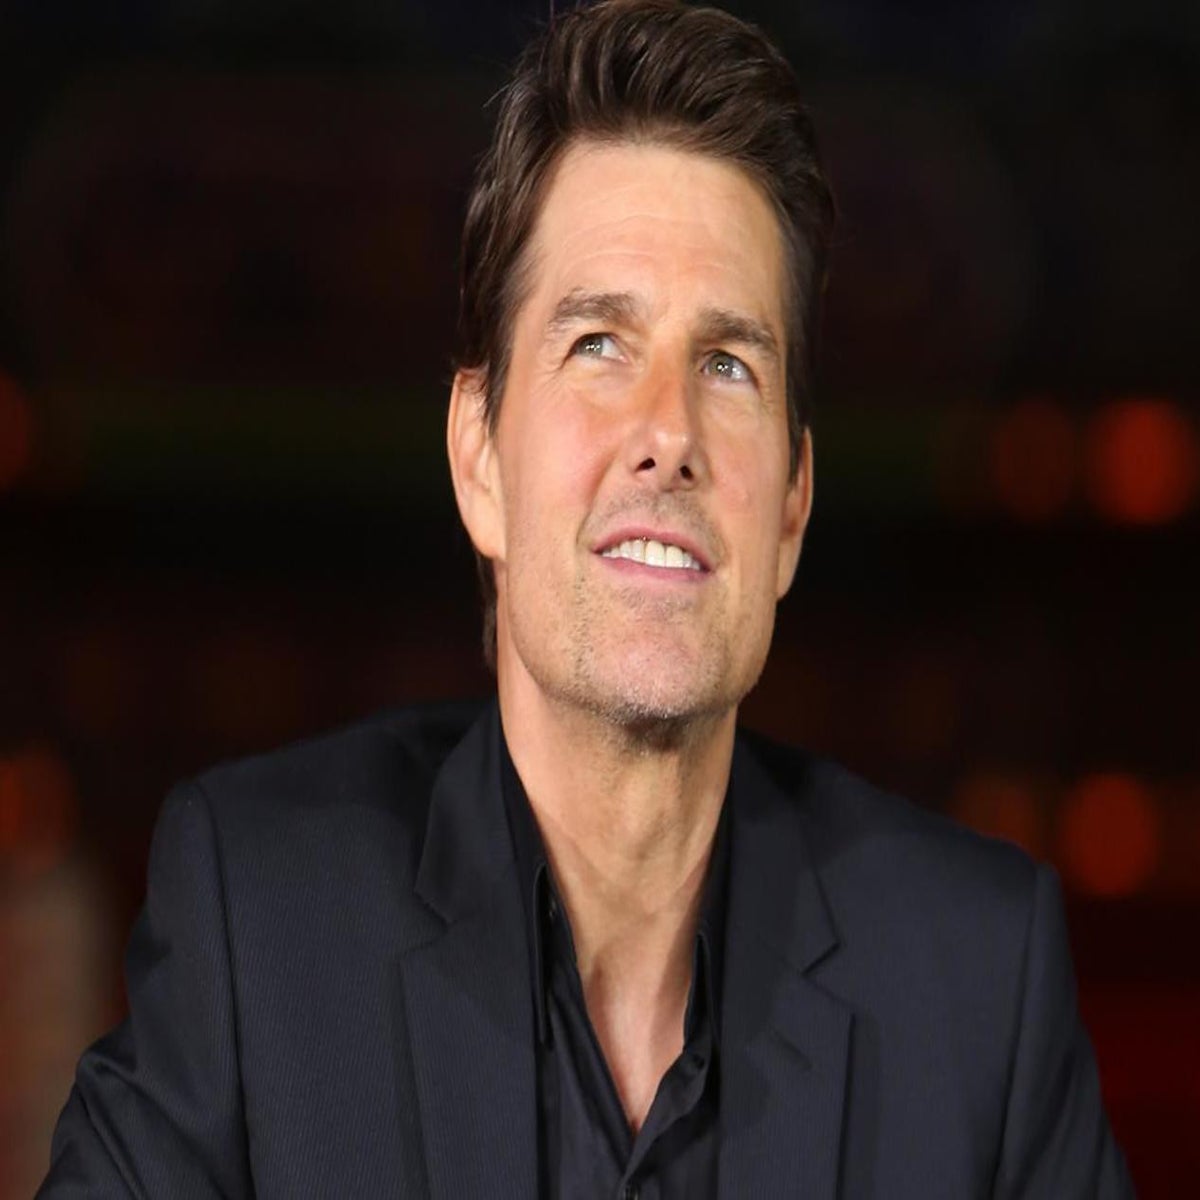 Jack Reacher: With Tom Cruise out, who will play the action hero next?, The Independent